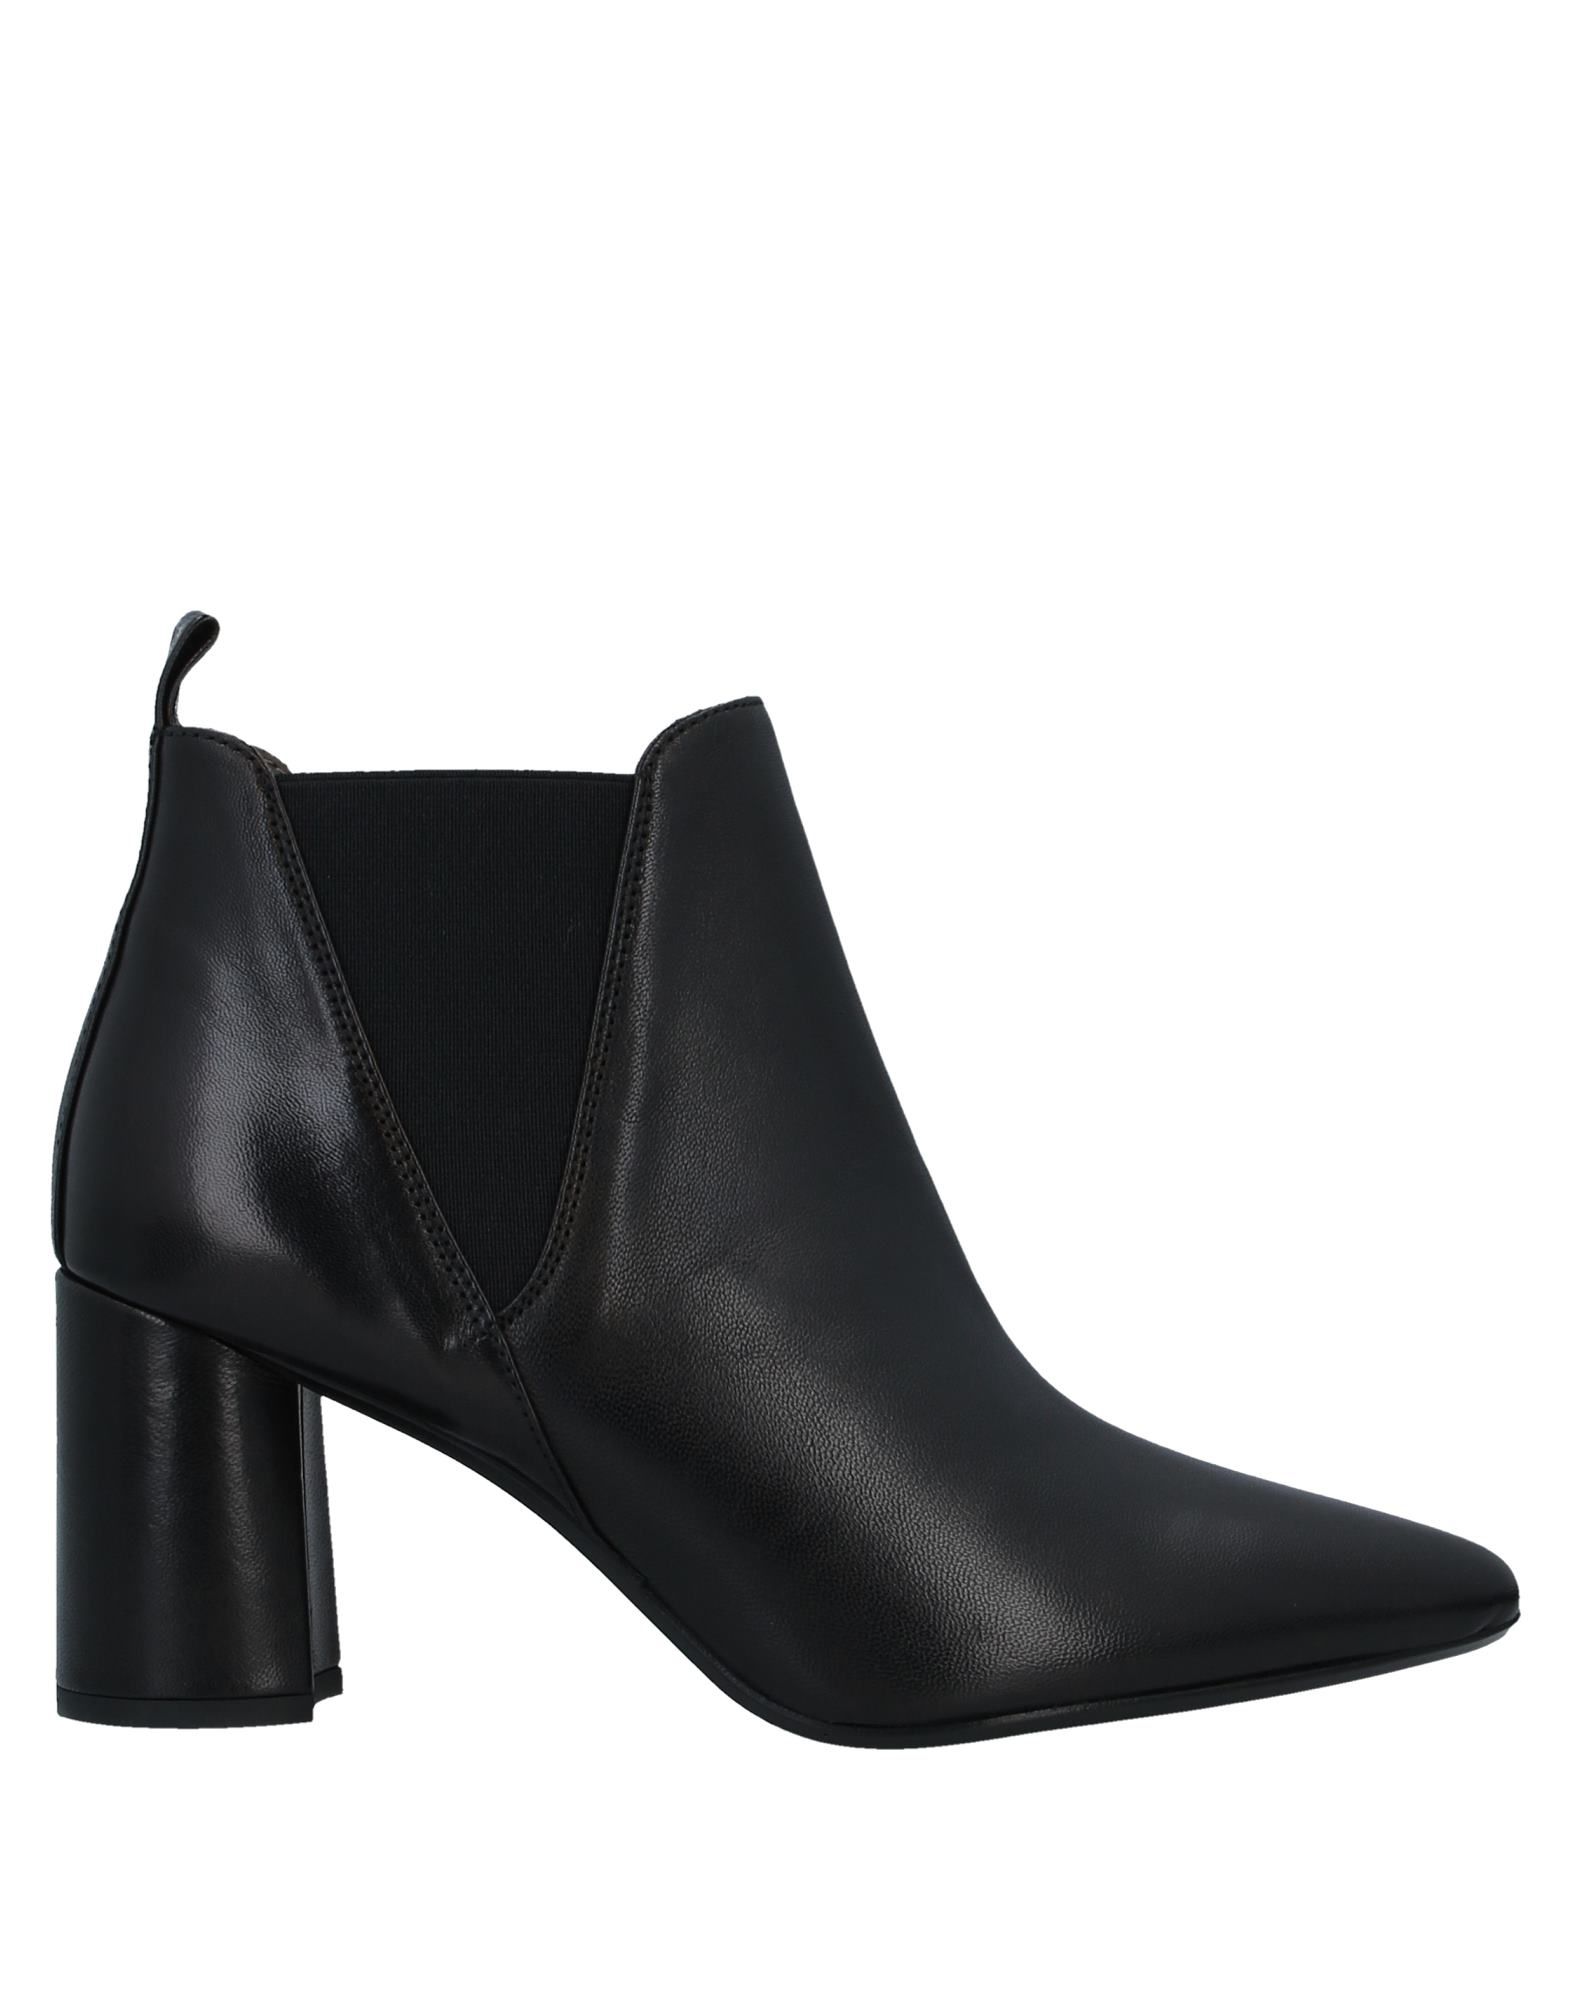 IL BORGO Firenze Ankle boots